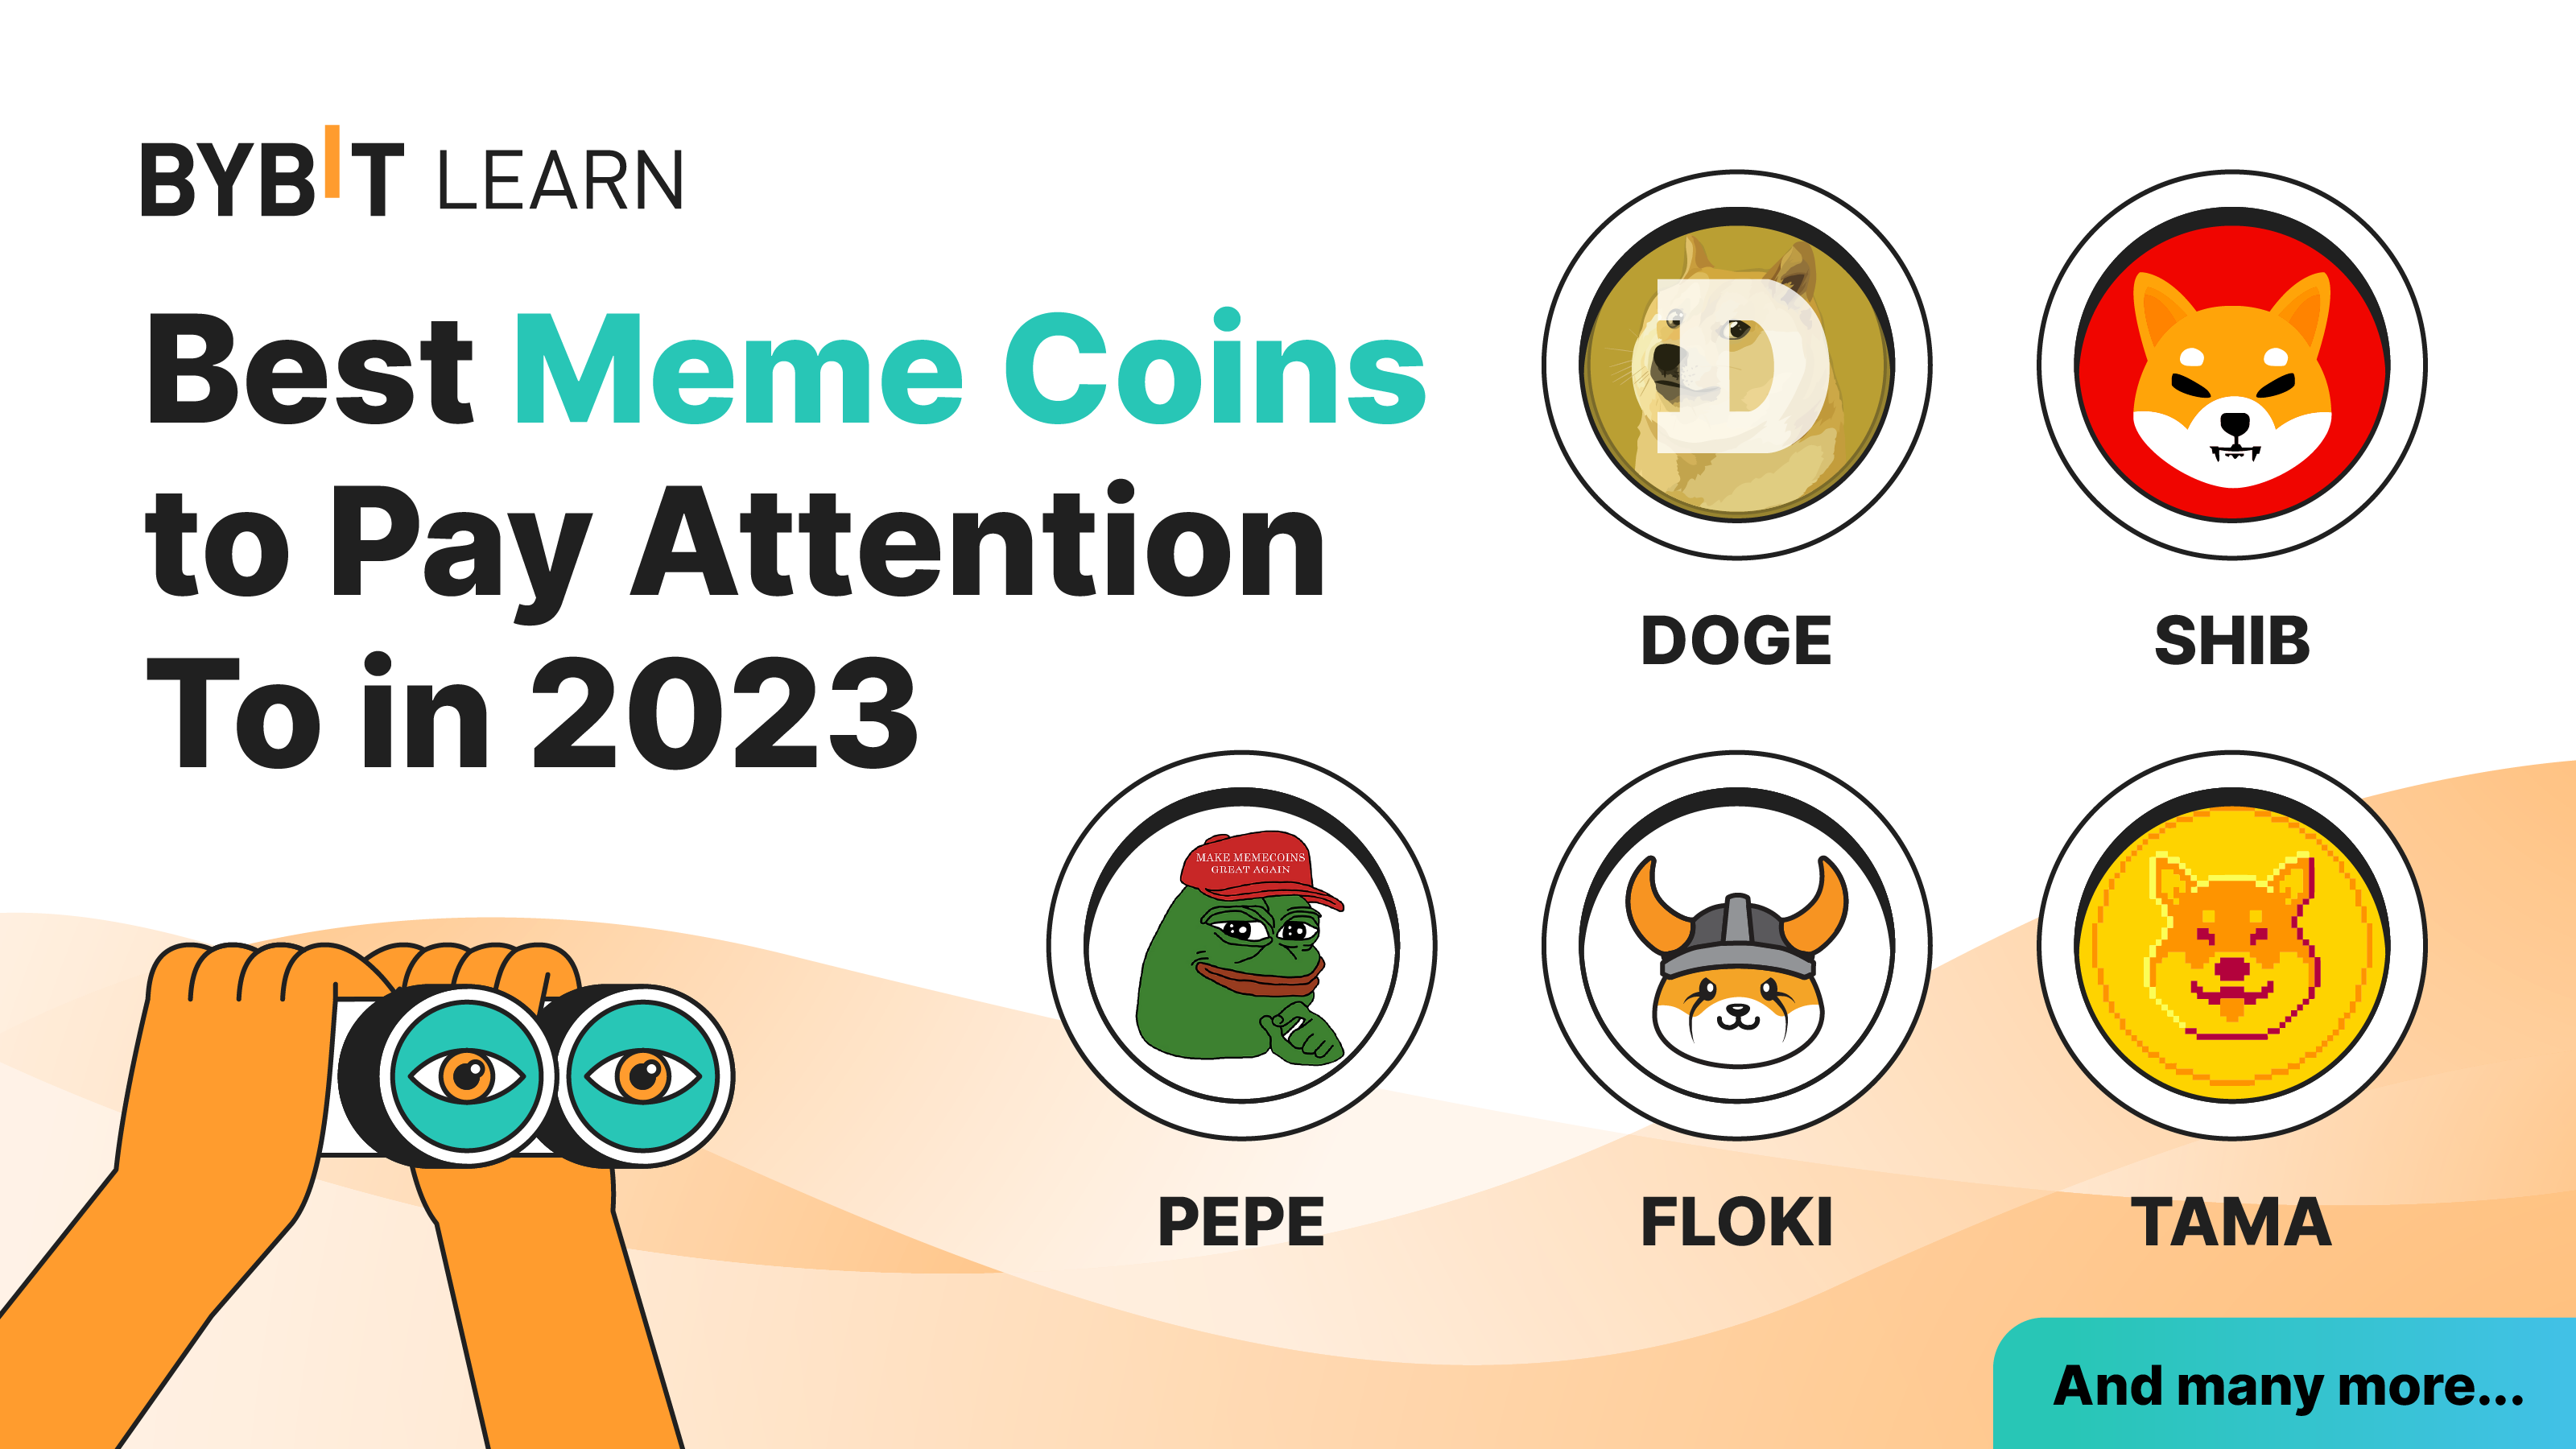 The Complete Meme Coin Marketing Guide